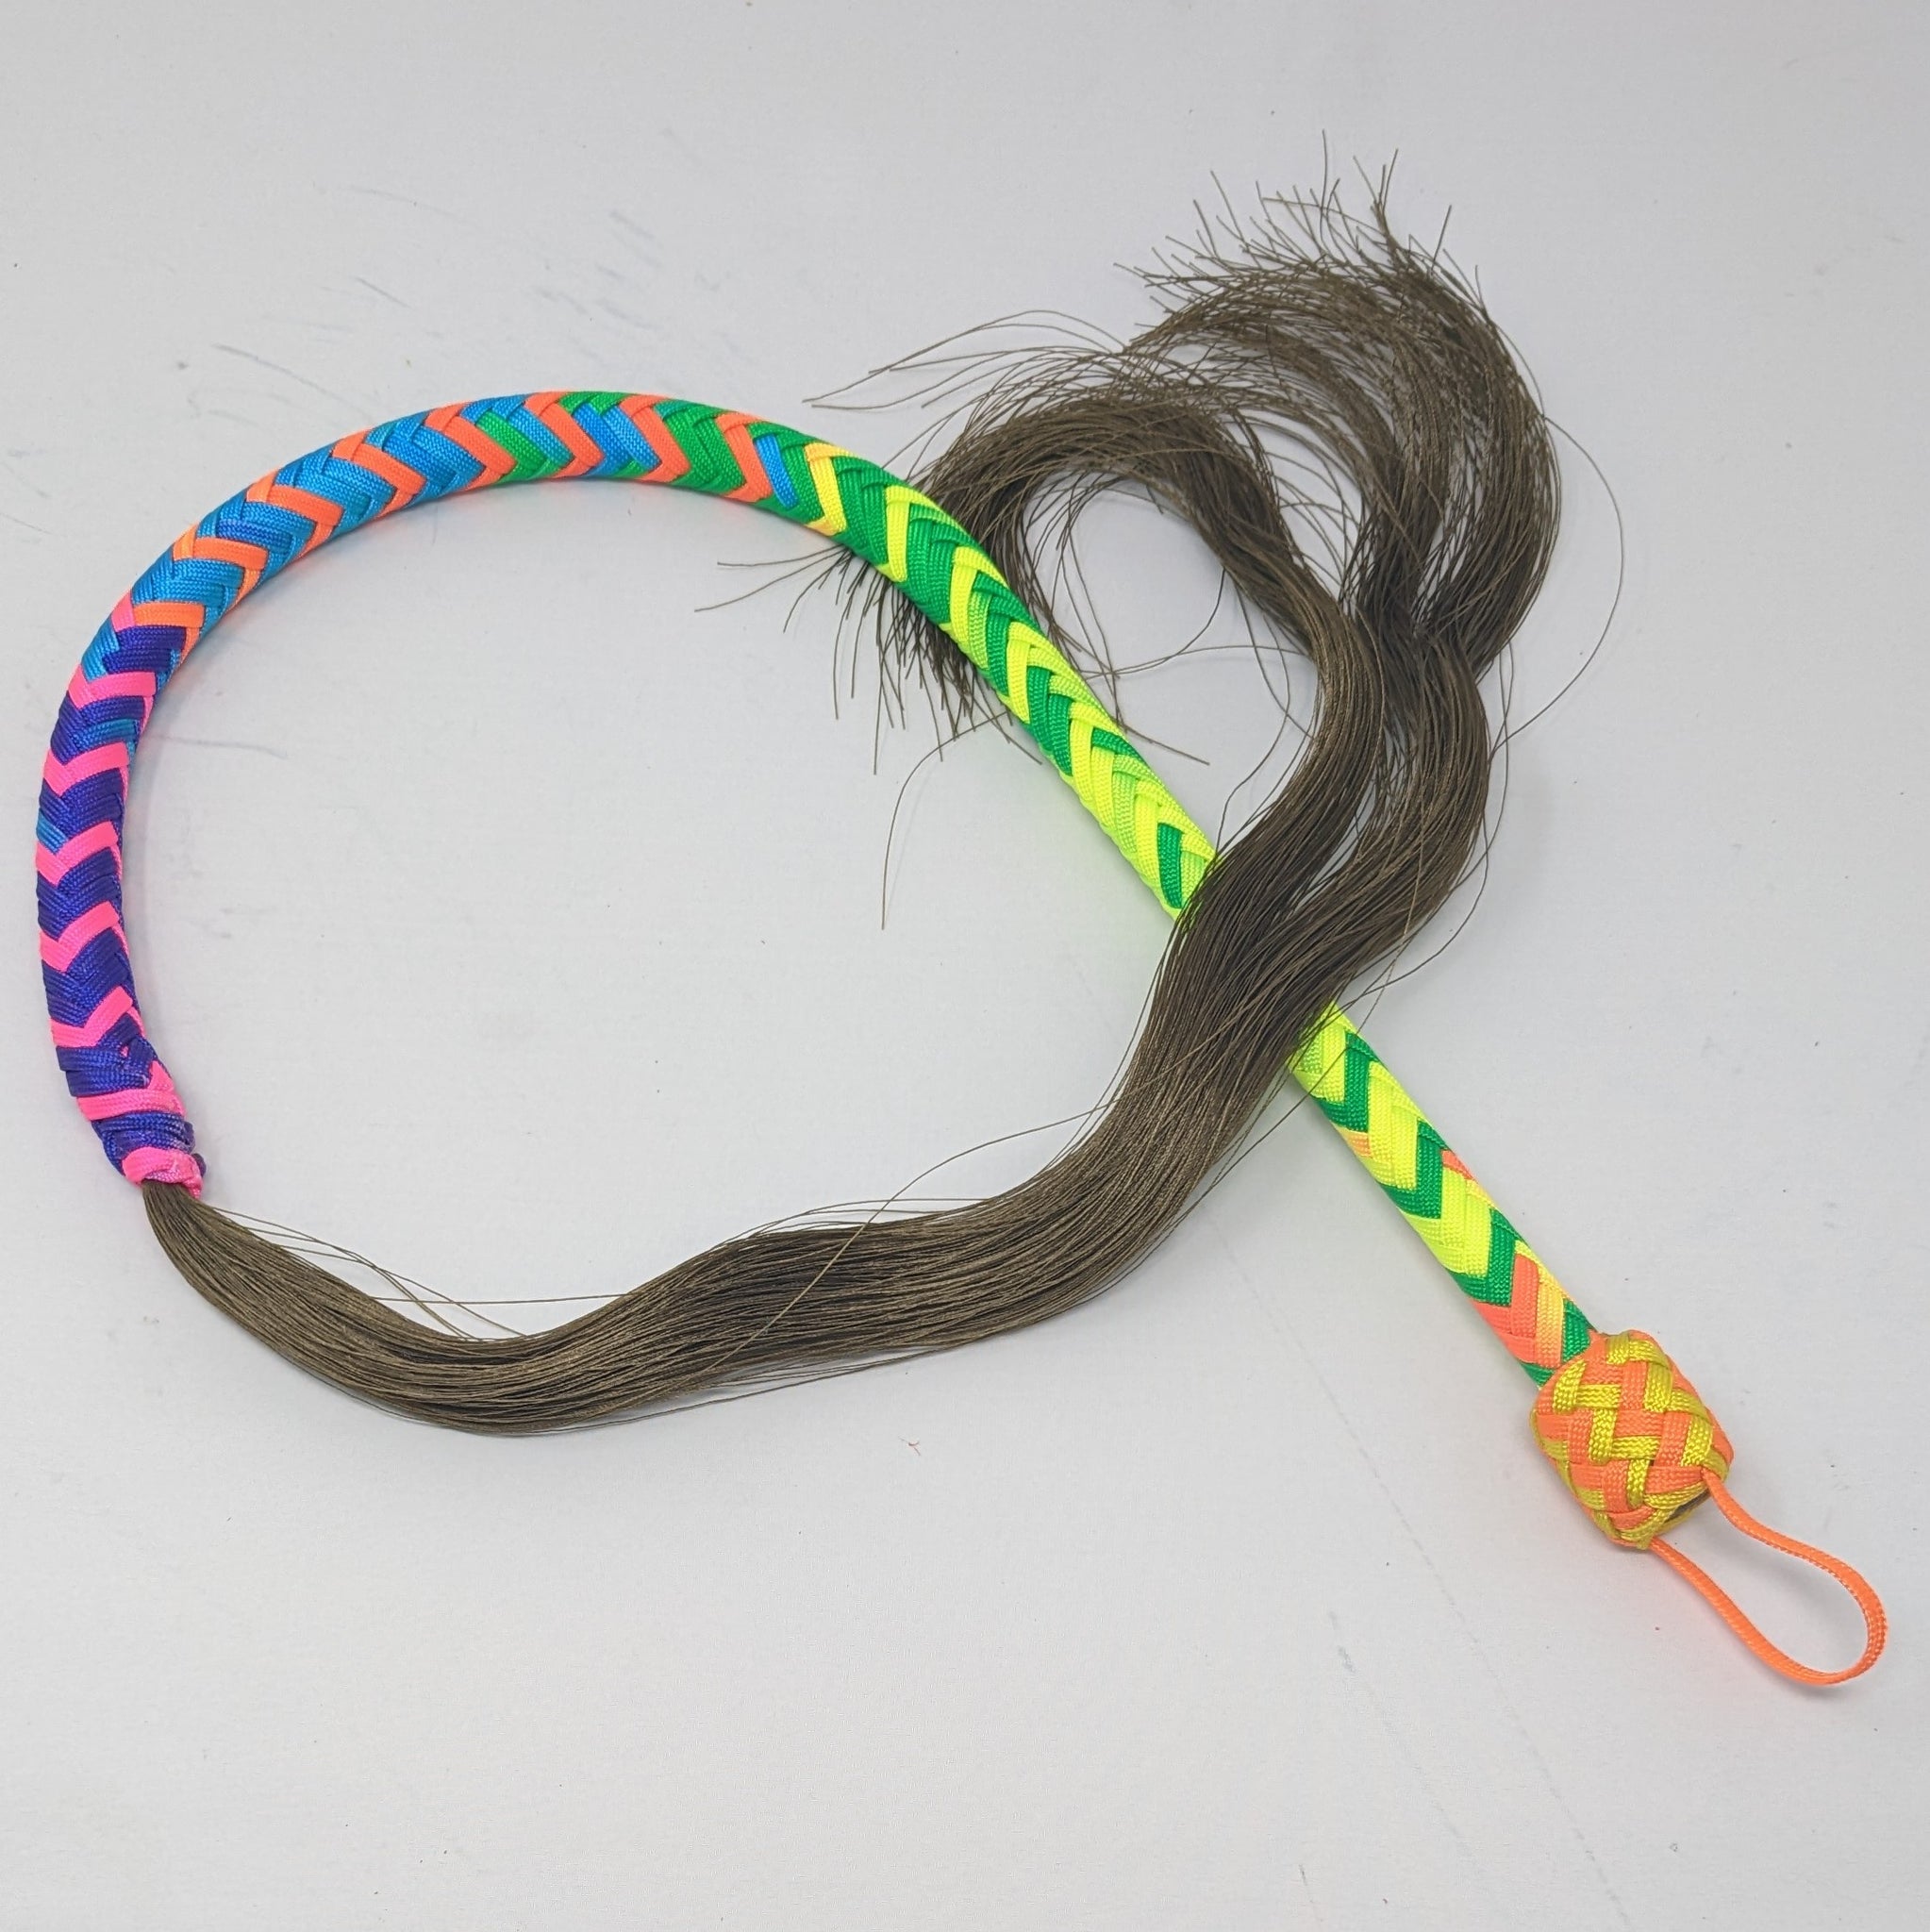 Fly Whisk Paracord (Bullwhip-Style Core)